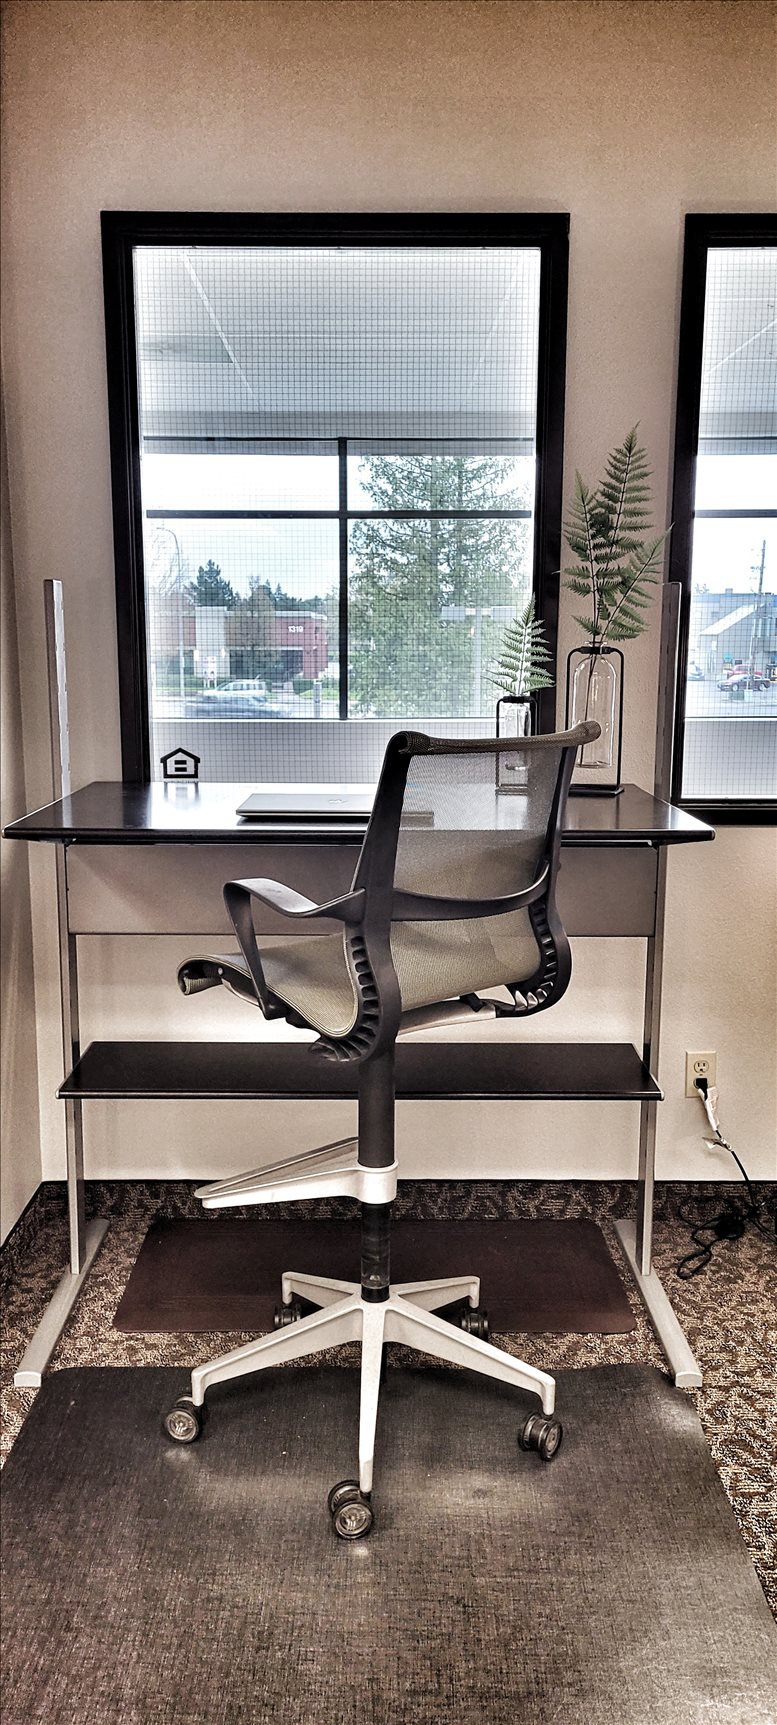 This is a photo of the office space available to rent on 1404 NE 134th St, Suite 220